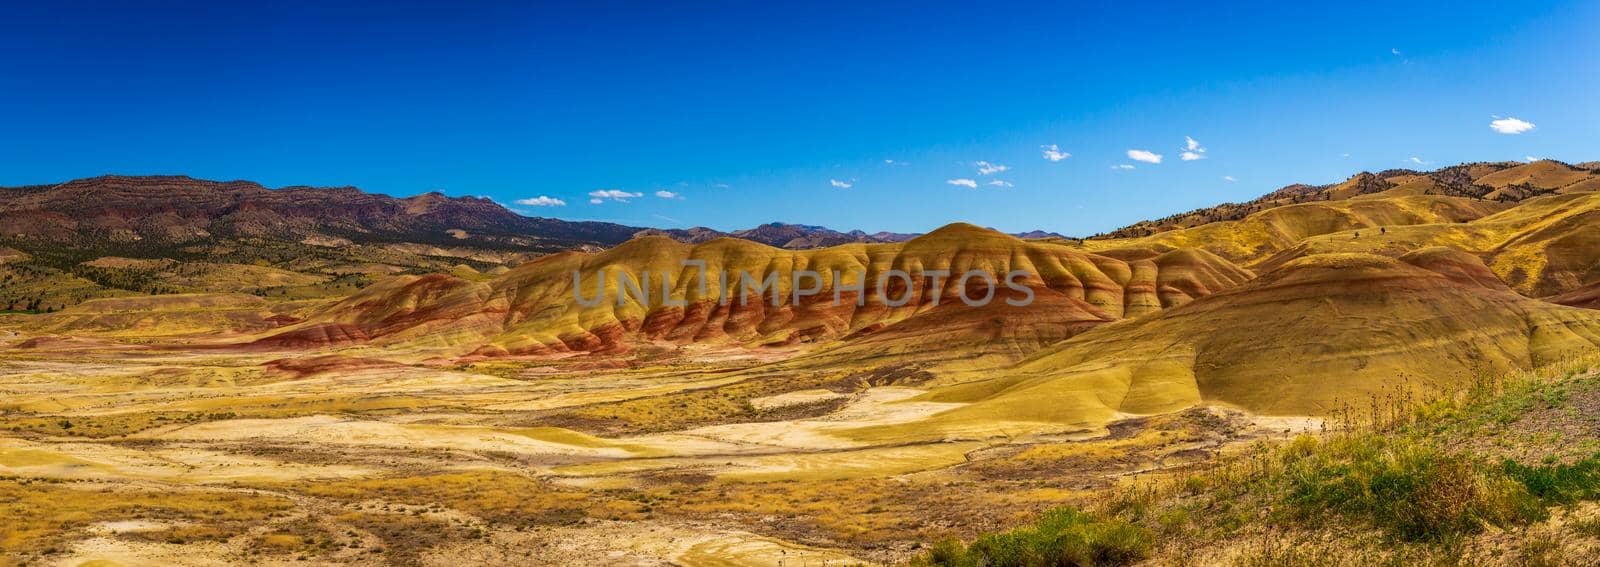 Colorful layers of Painted Hills by gepeng